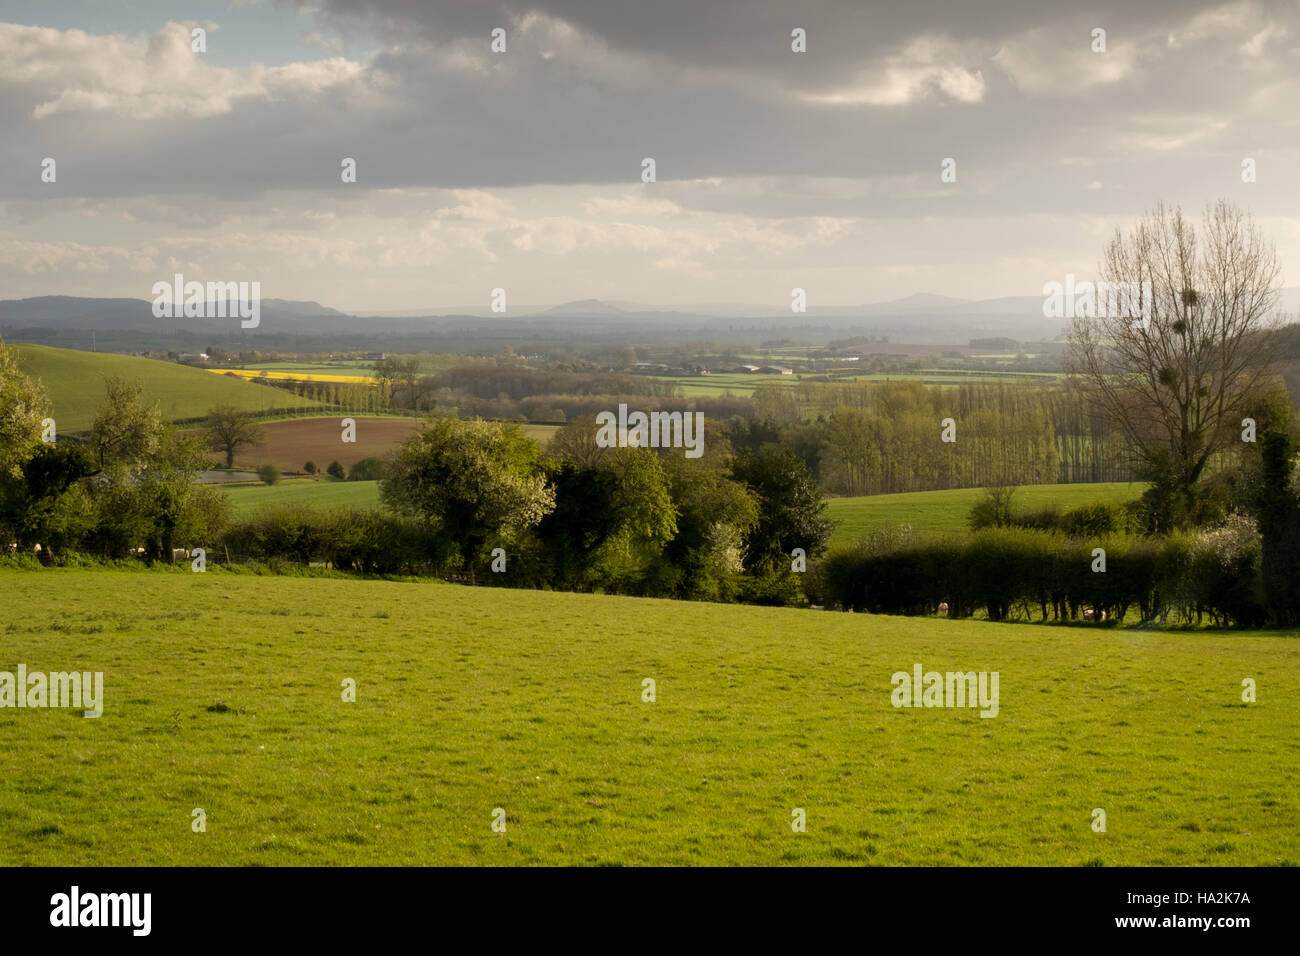 Looking over a sunlit meadow and blossoming hedgerow to rolling fields, hills and the Brecon Beacons in the far distance. 5. Stock Photo